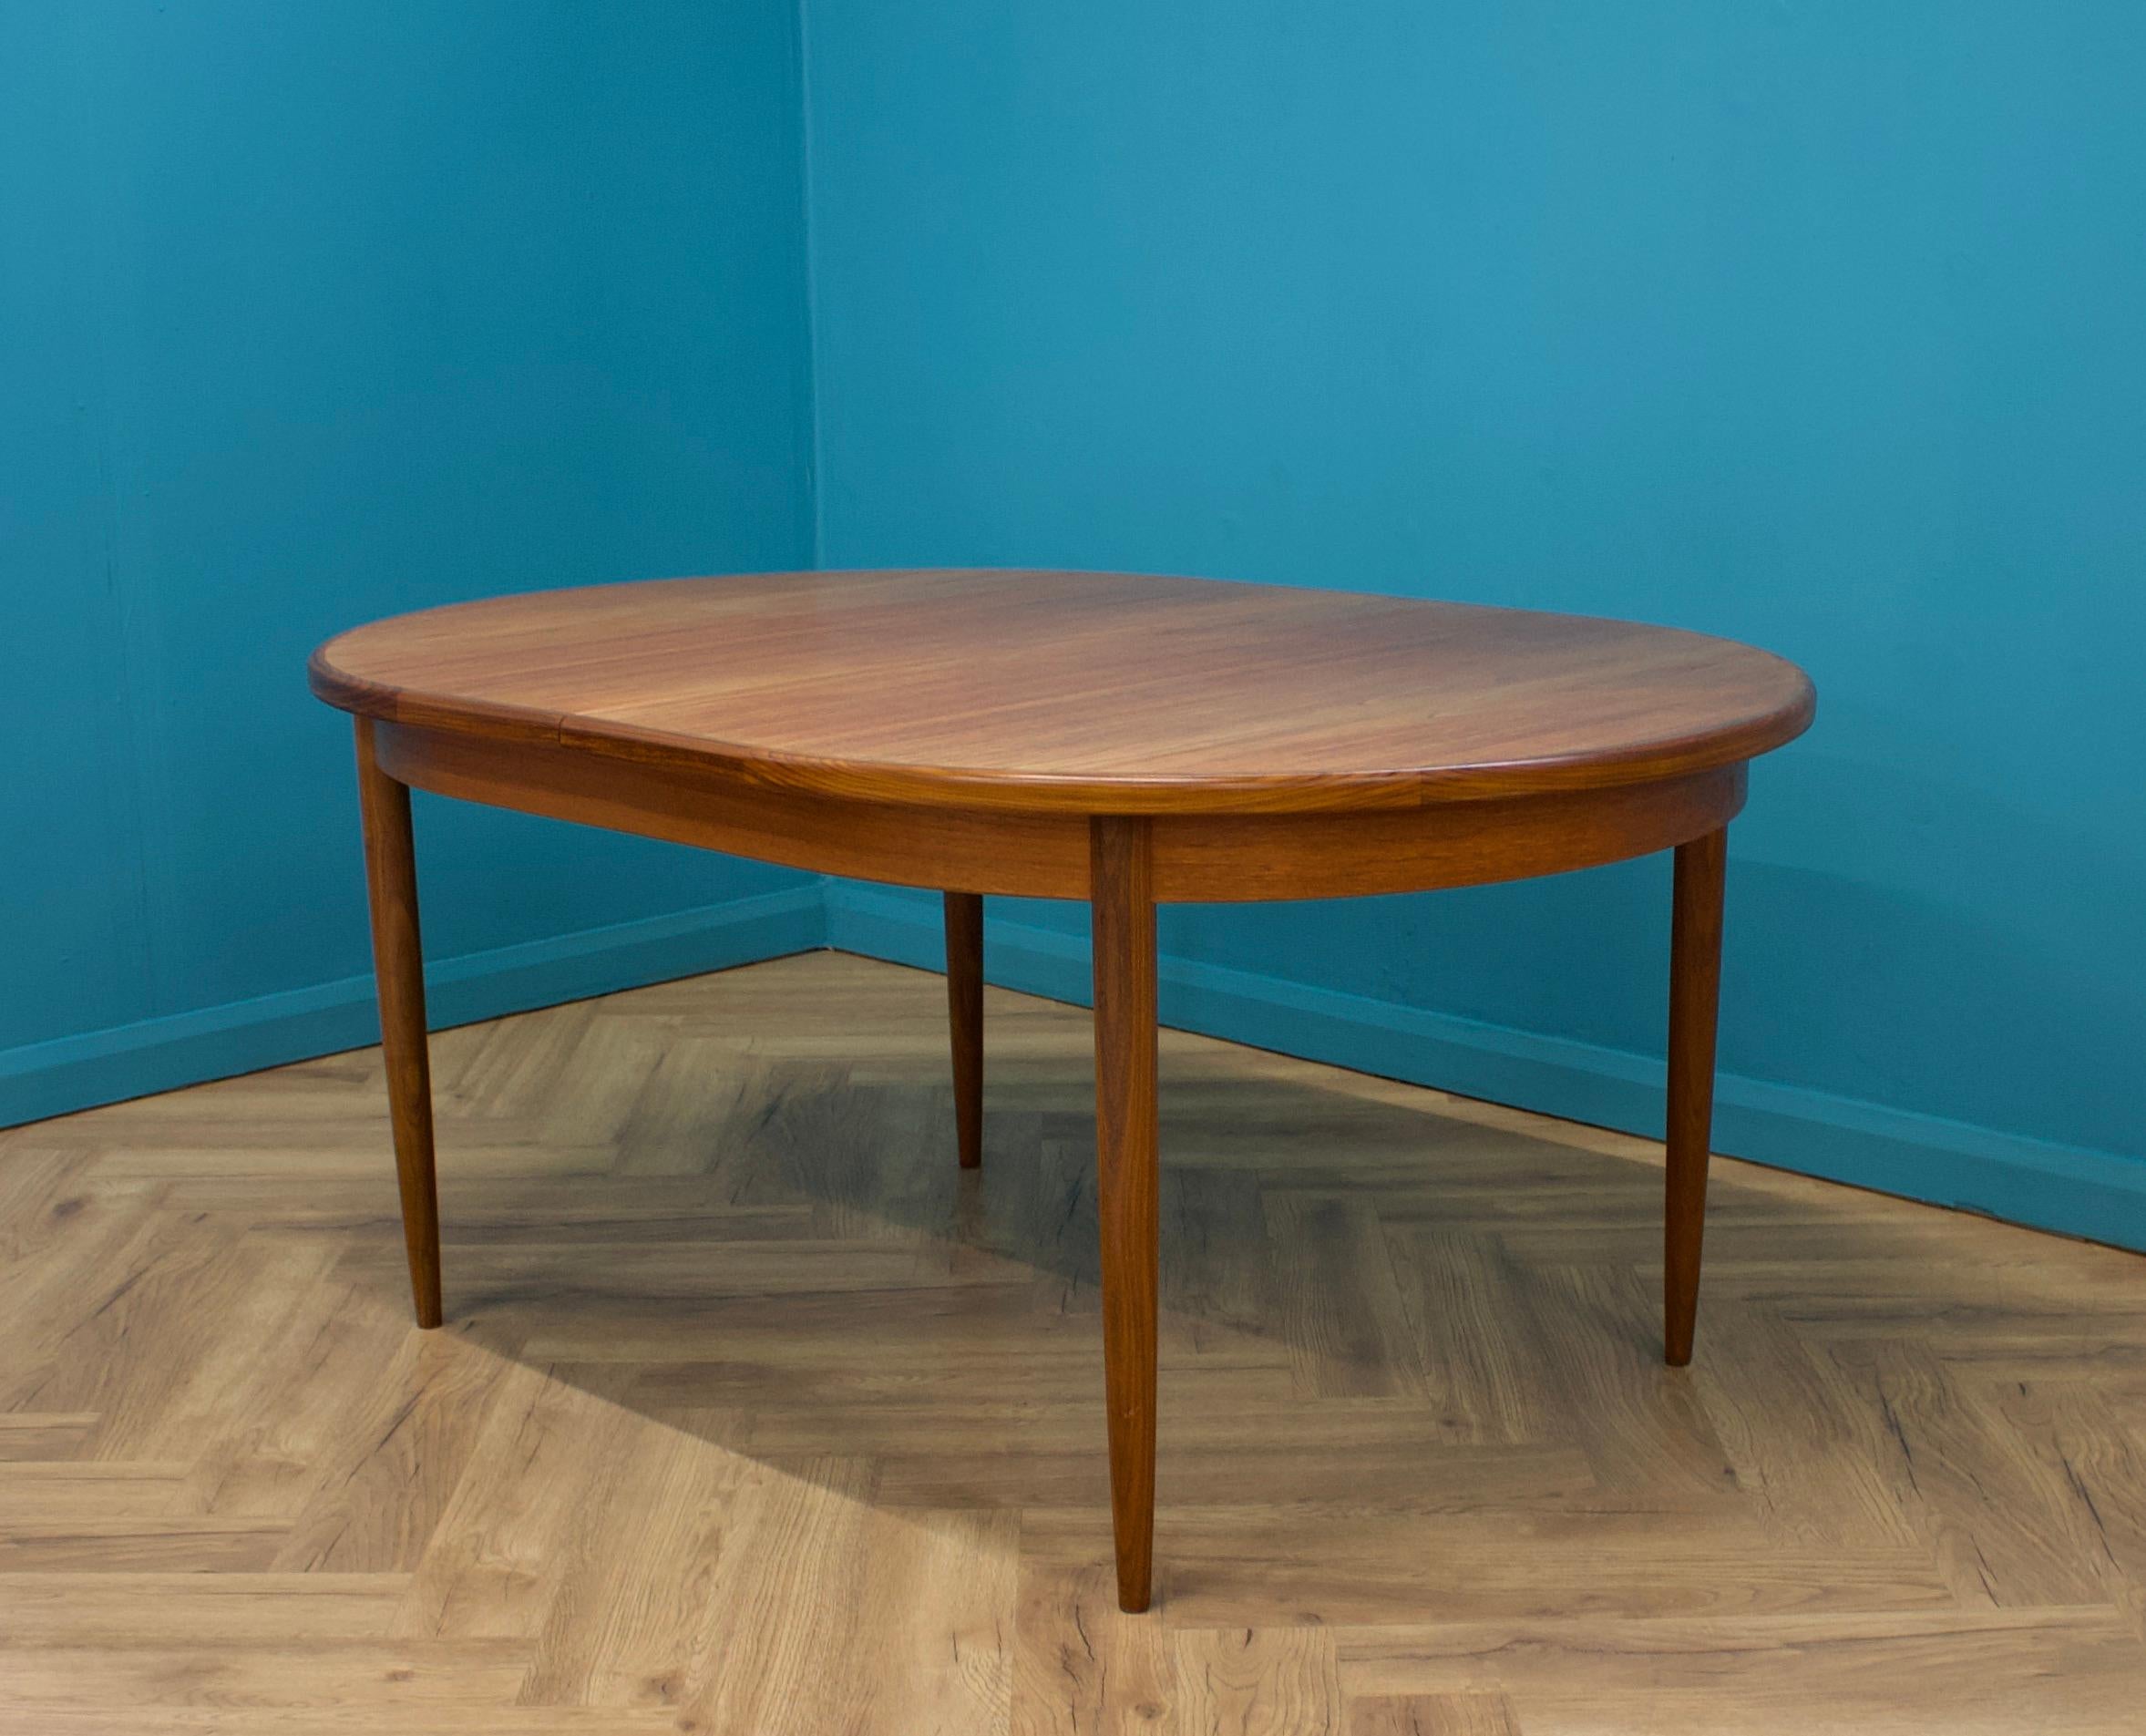 British Mid-Century Dining Table in Teak from G-Plan, 1960s For Sale